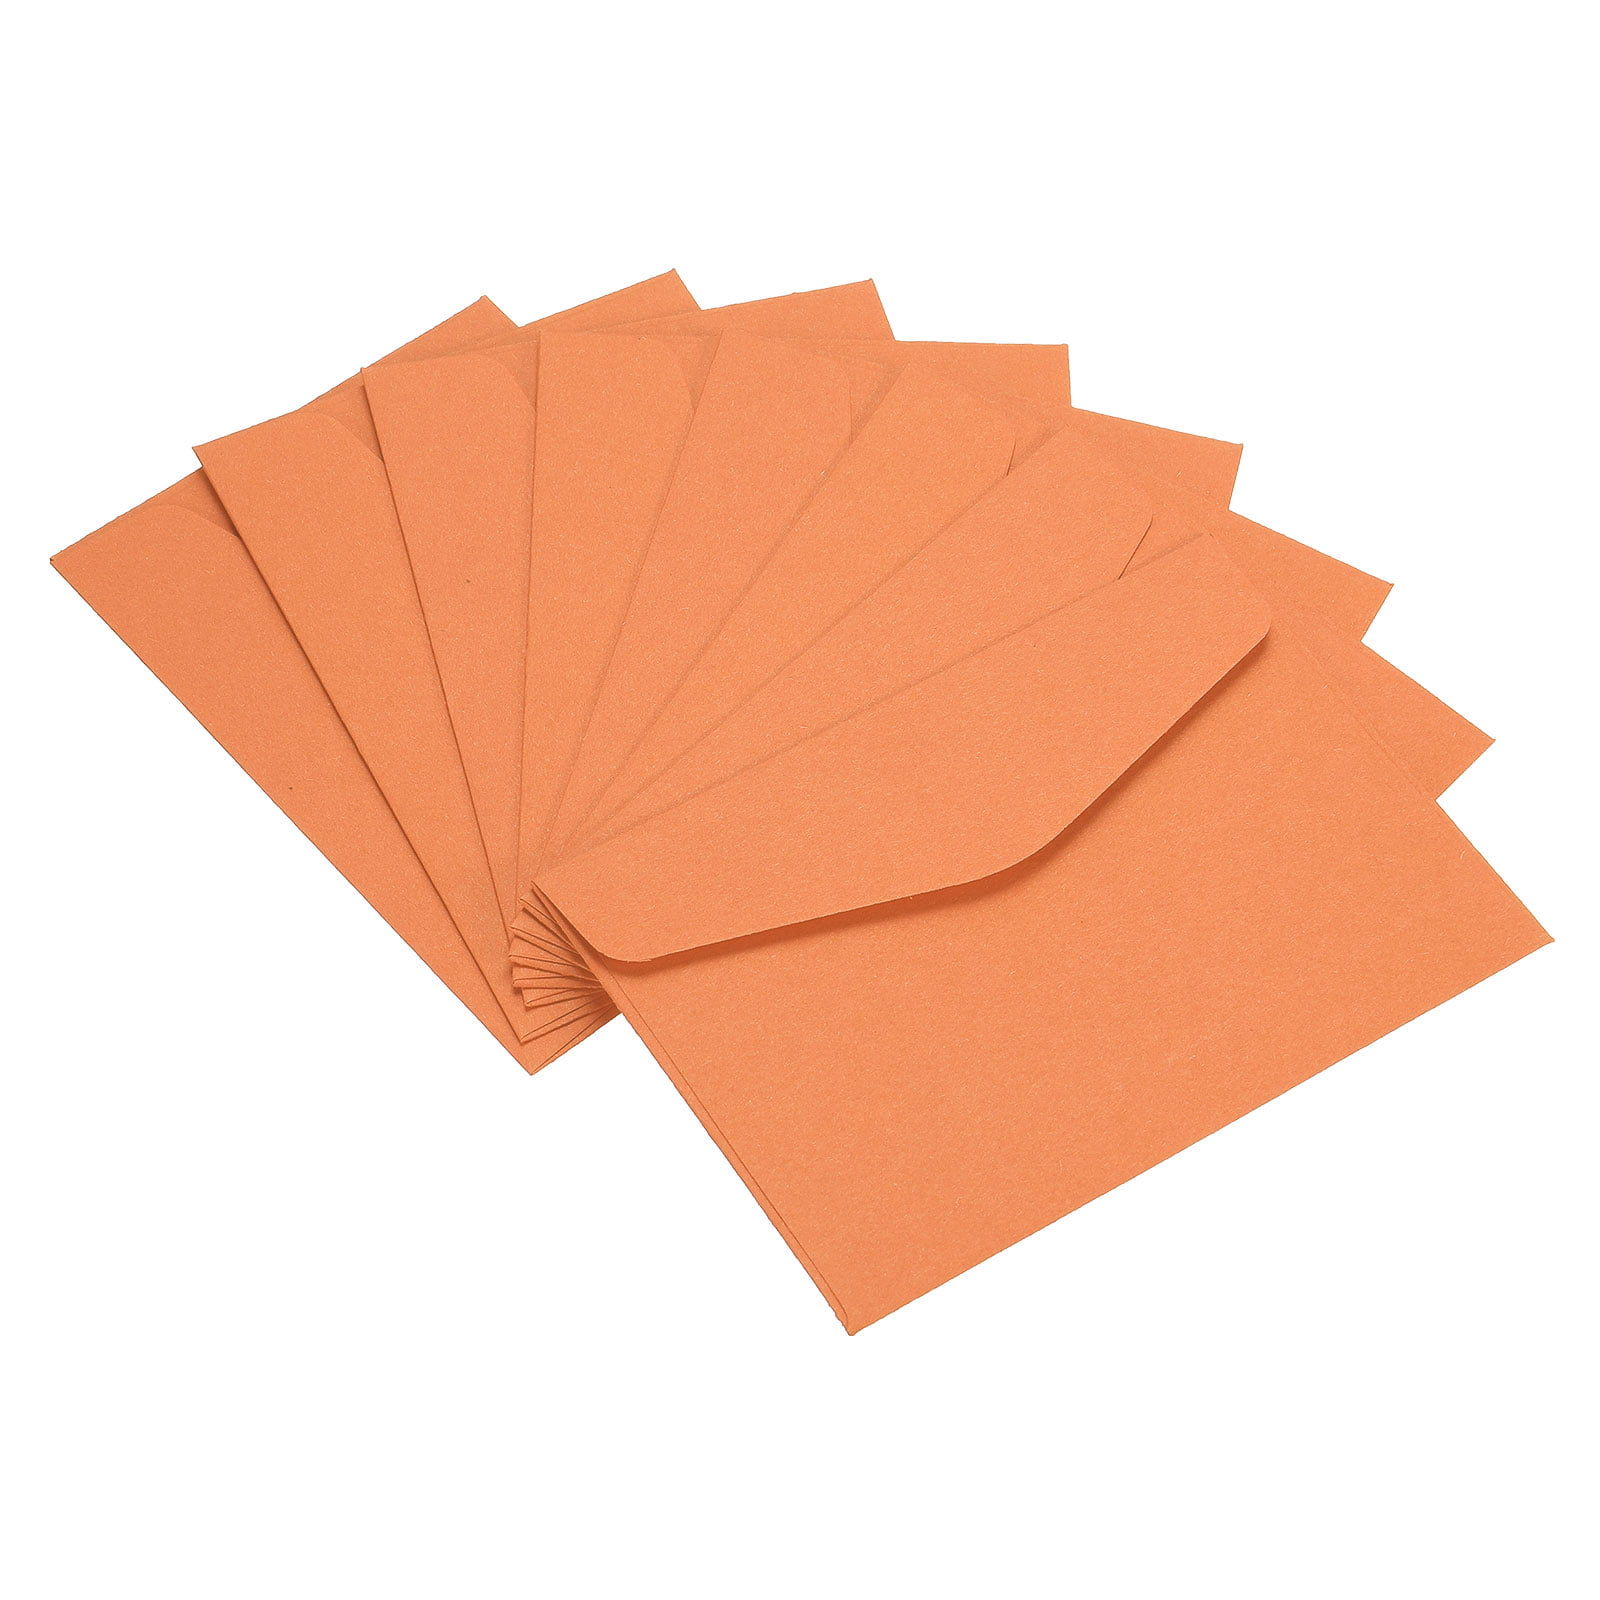 Assorted Blank Mini Note Cards and Envelopes for Card Making and Gifts Orange